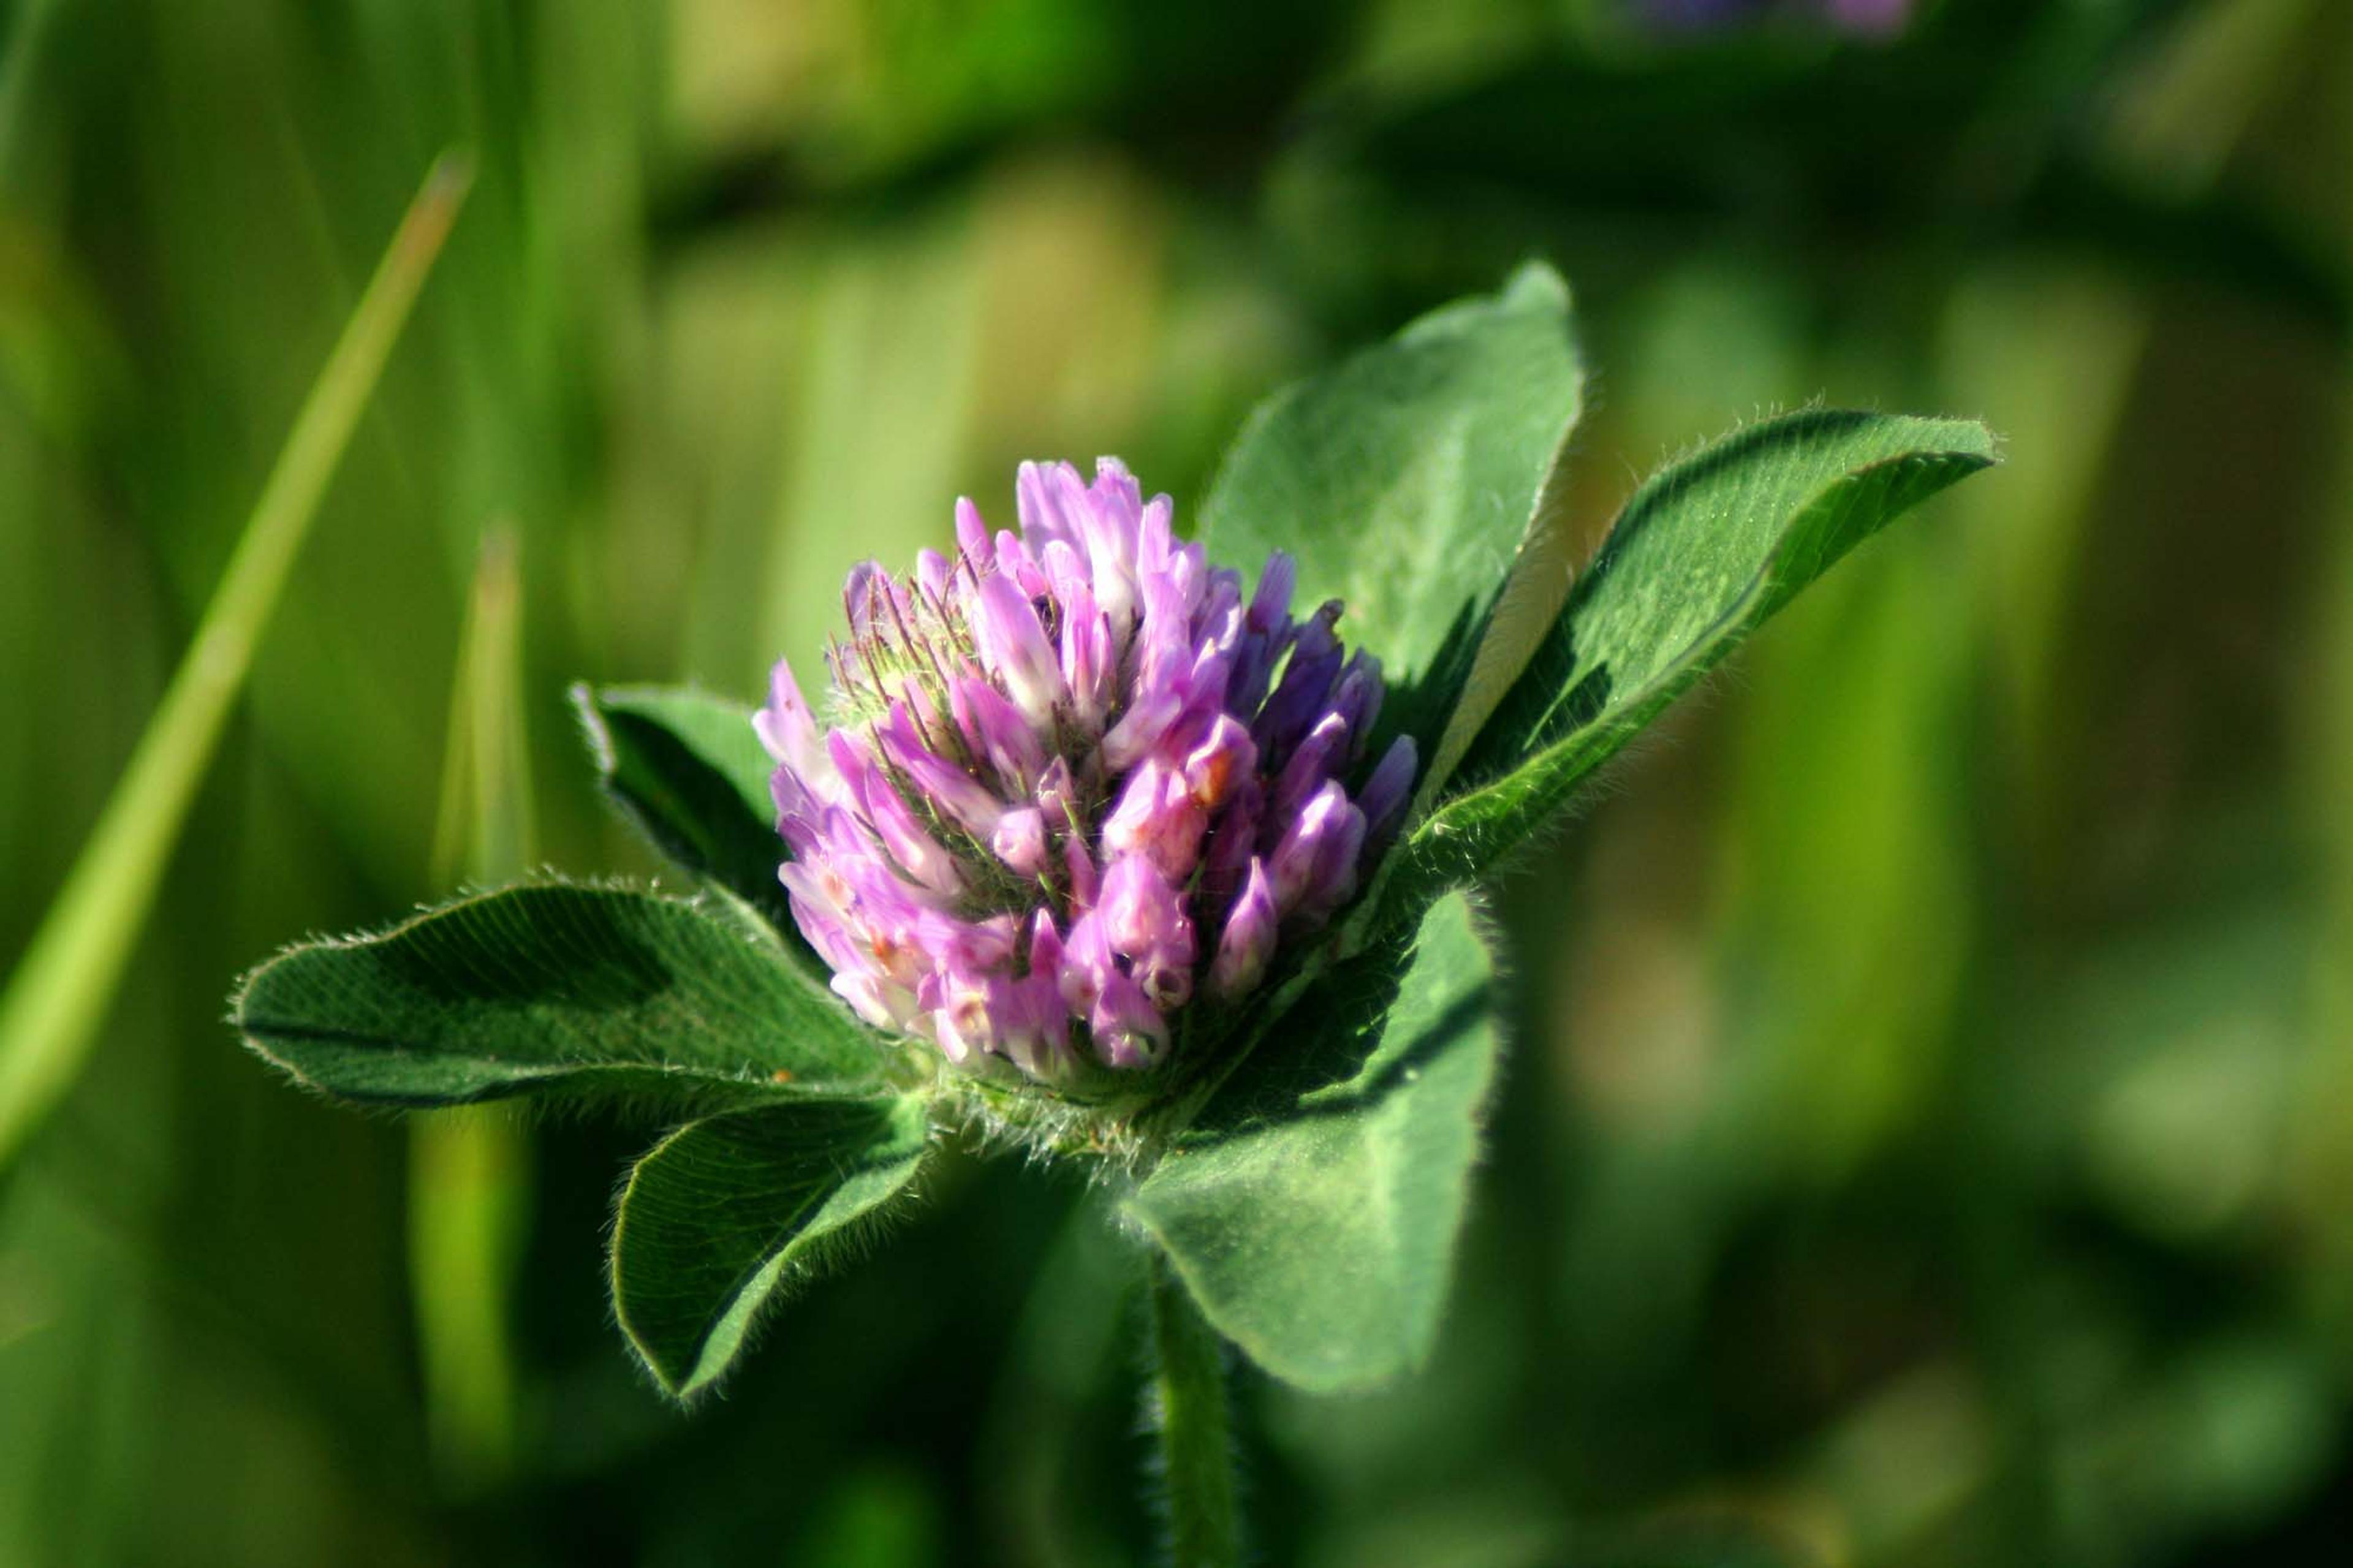 Red clover flower which contains extracts that may help regrow hair.